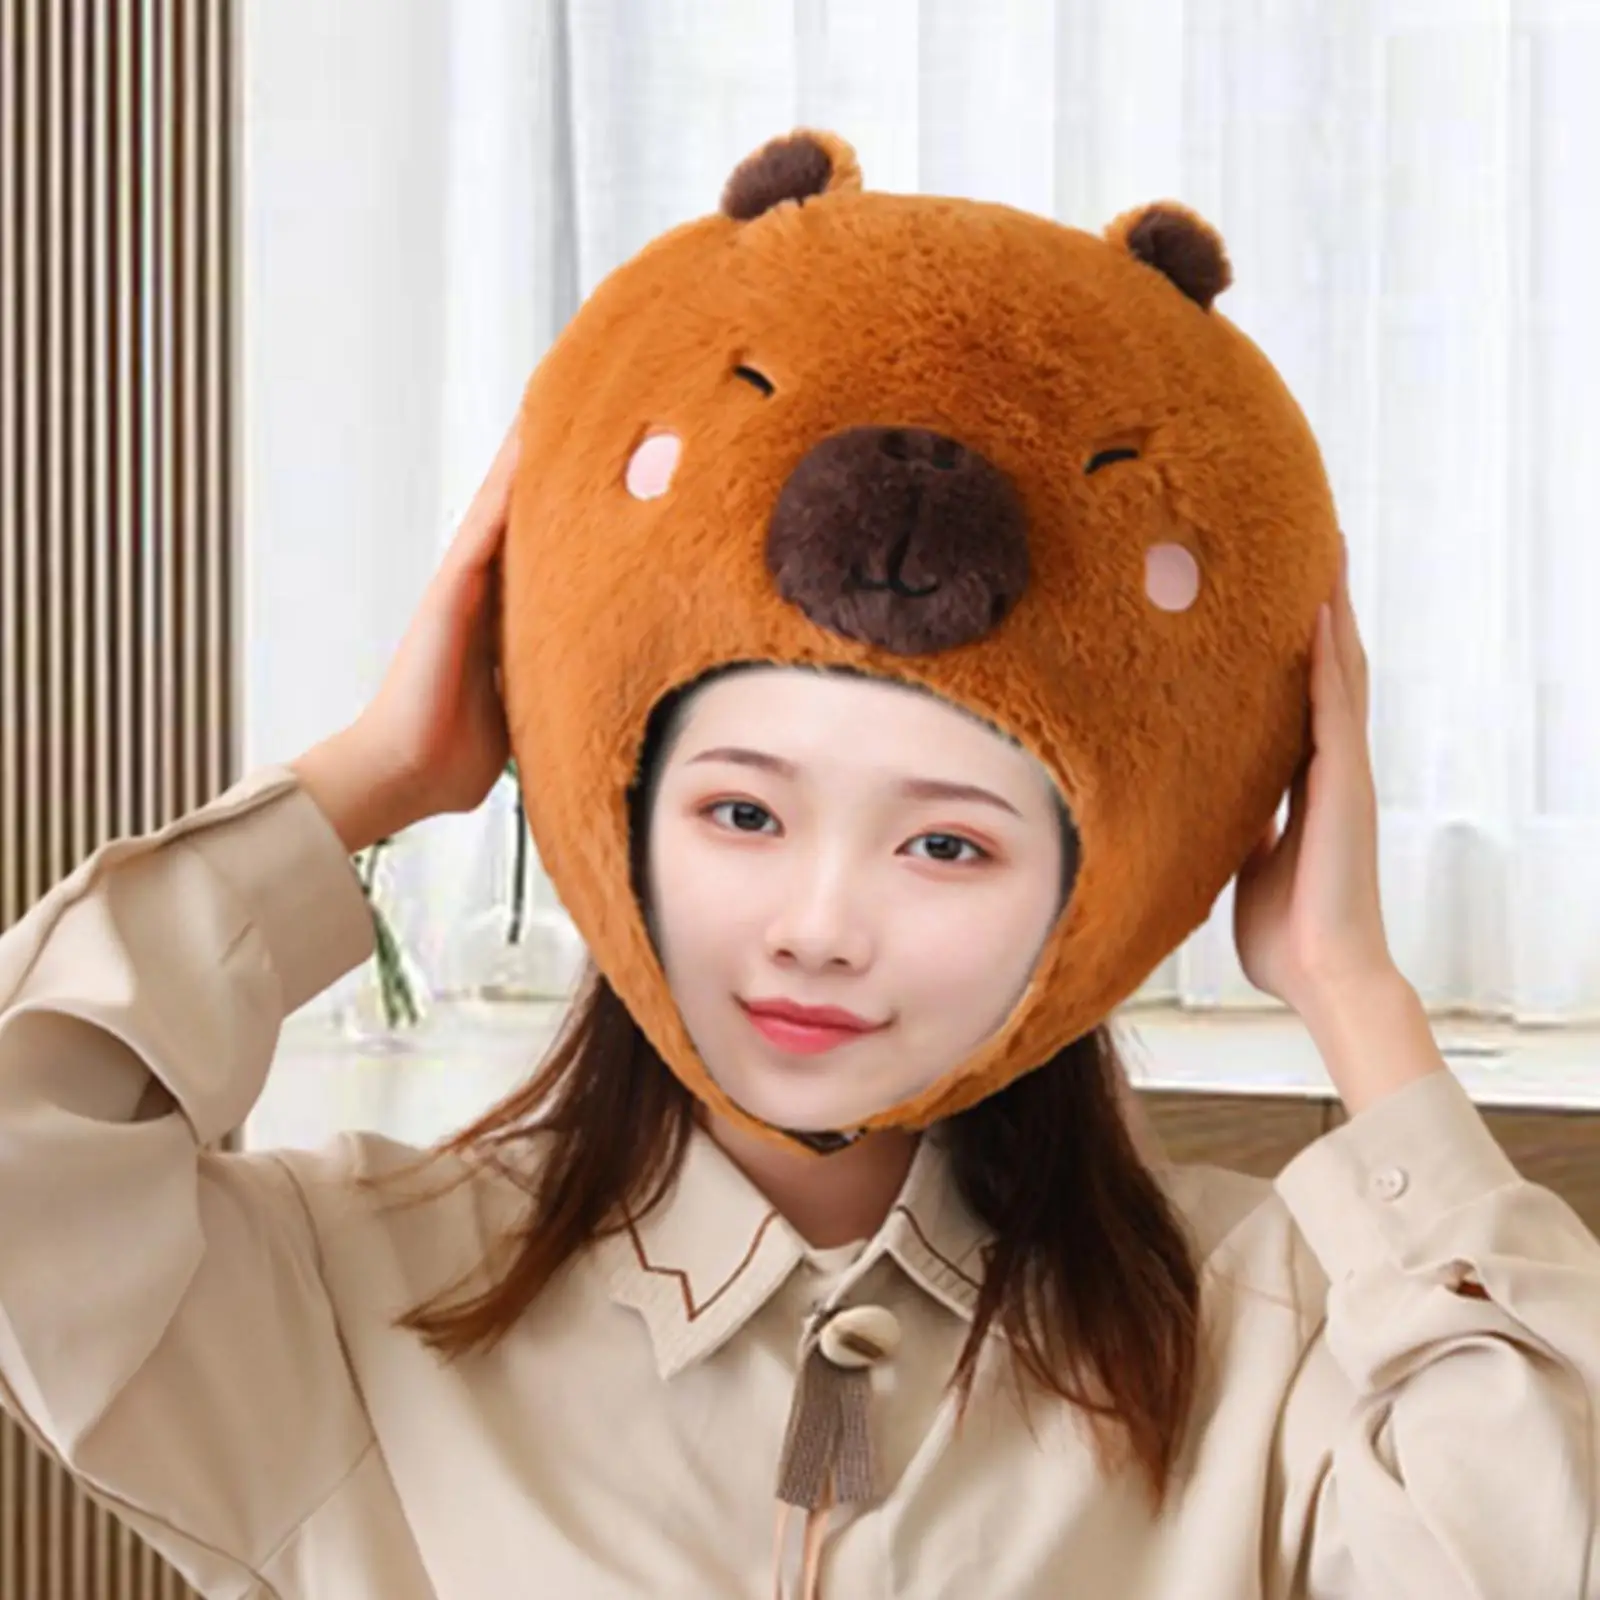 Plush Animal Hat Boys Girls Costume Accessories Capybara Headwear for Holiday Carnival Birthday Party Role Play Masquerade Ball